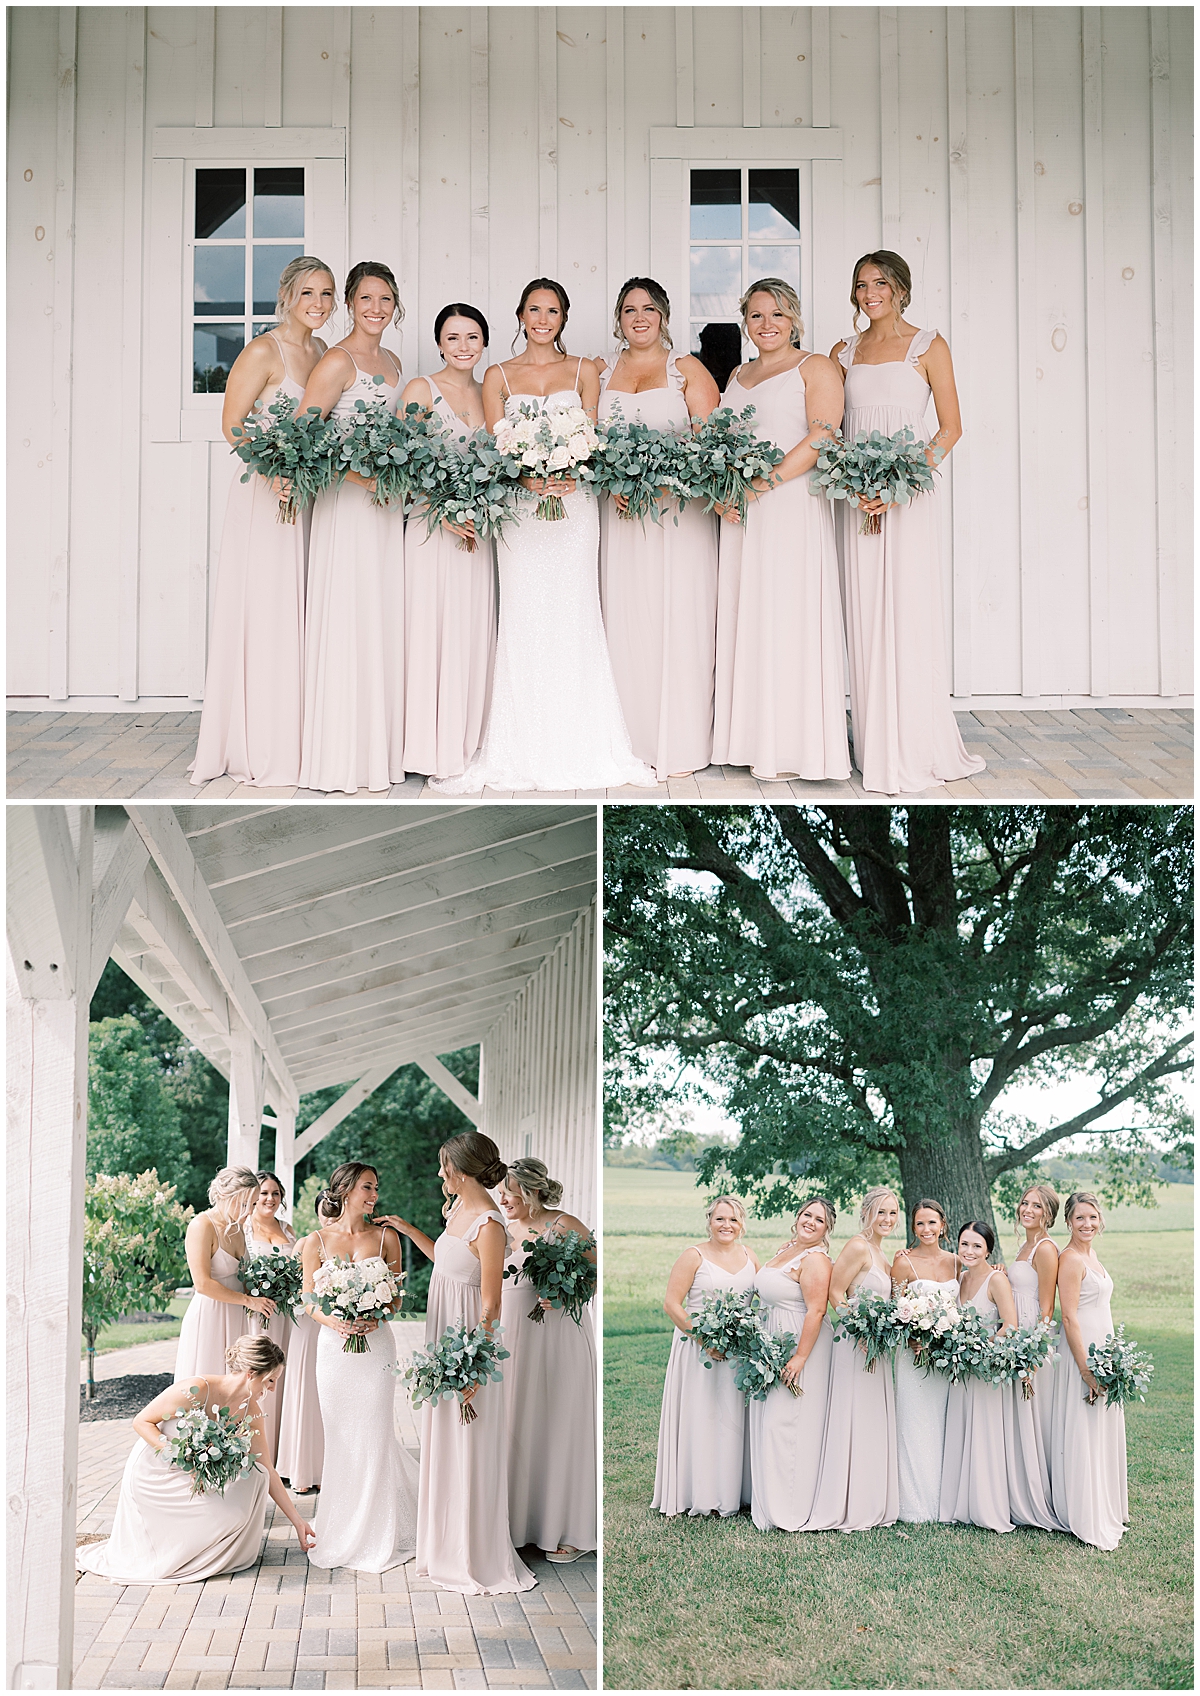 bride and bridesmaids holding wedding florals by Addie Eshelman photography 